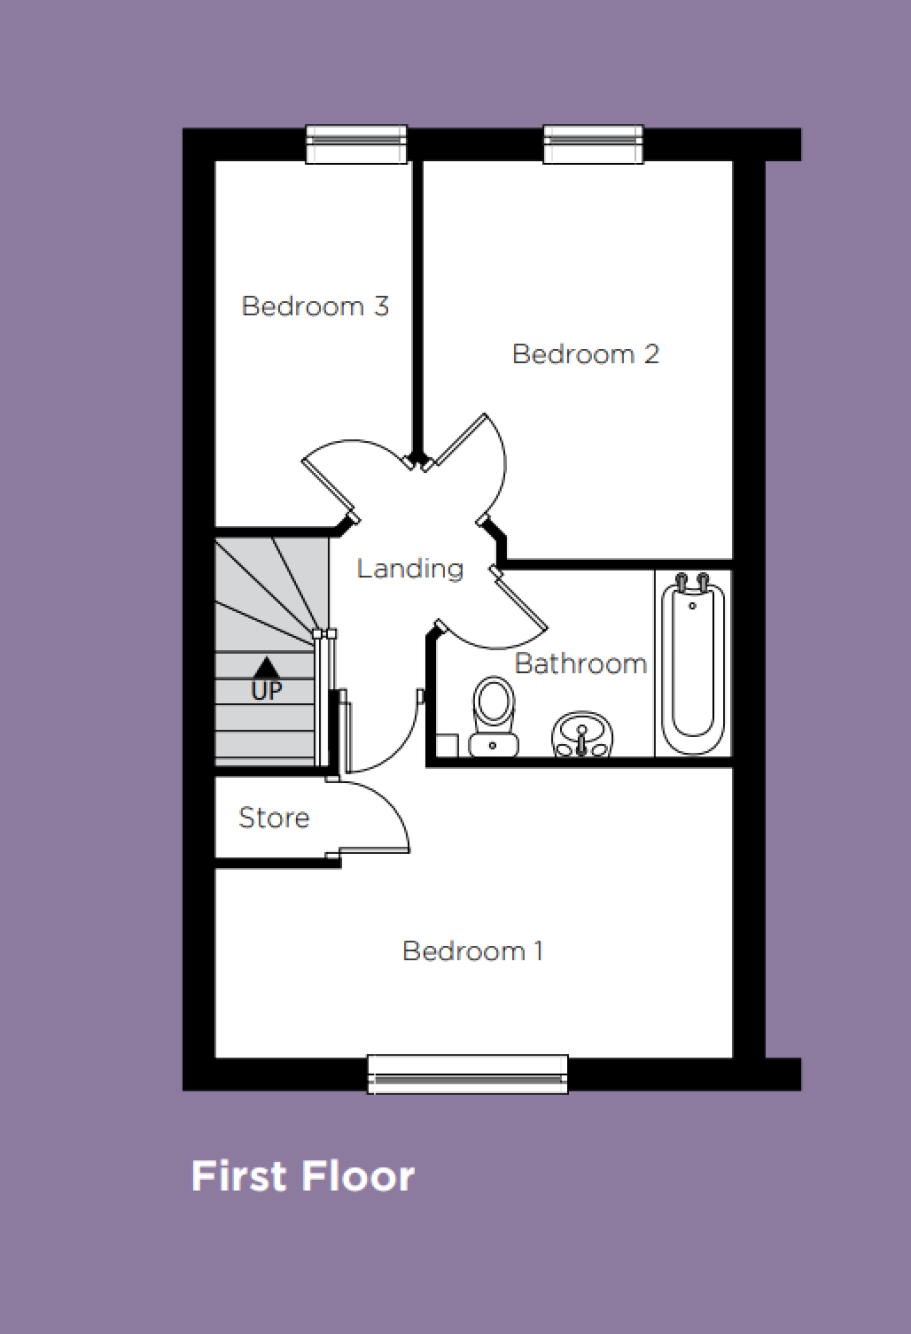 The Dudley First Floor Plan